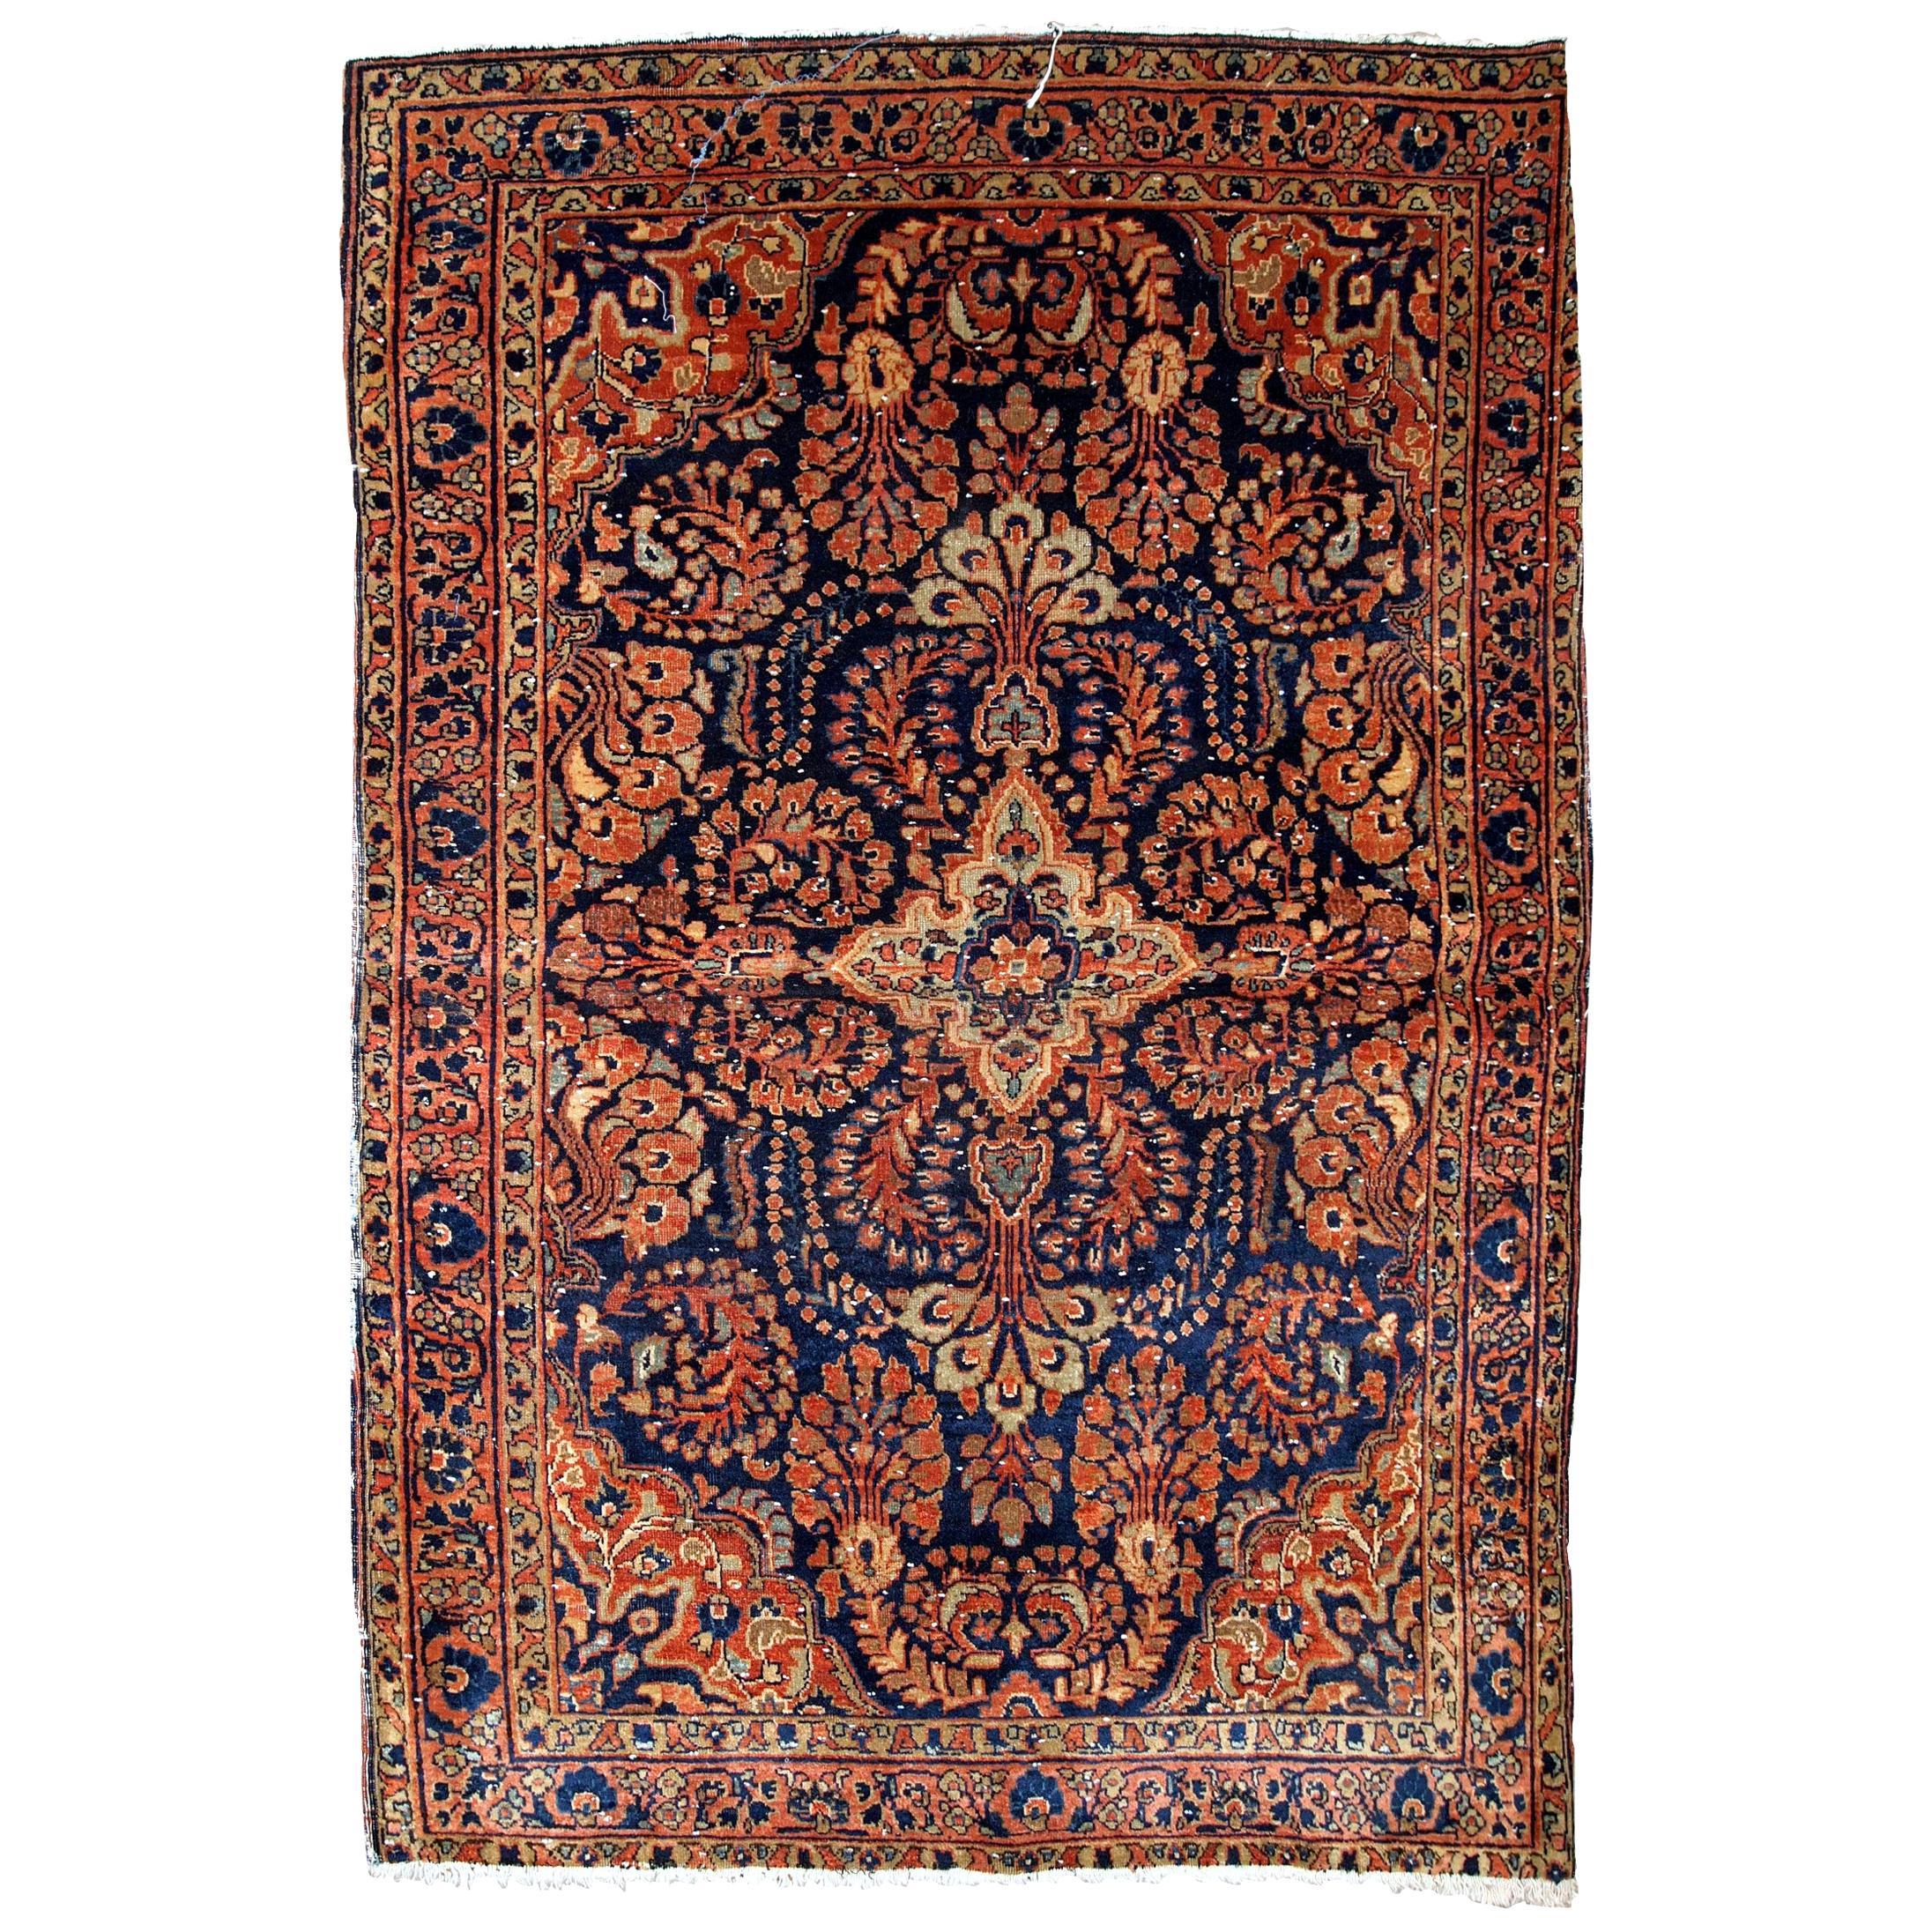 Rugs and Carpets at Auction